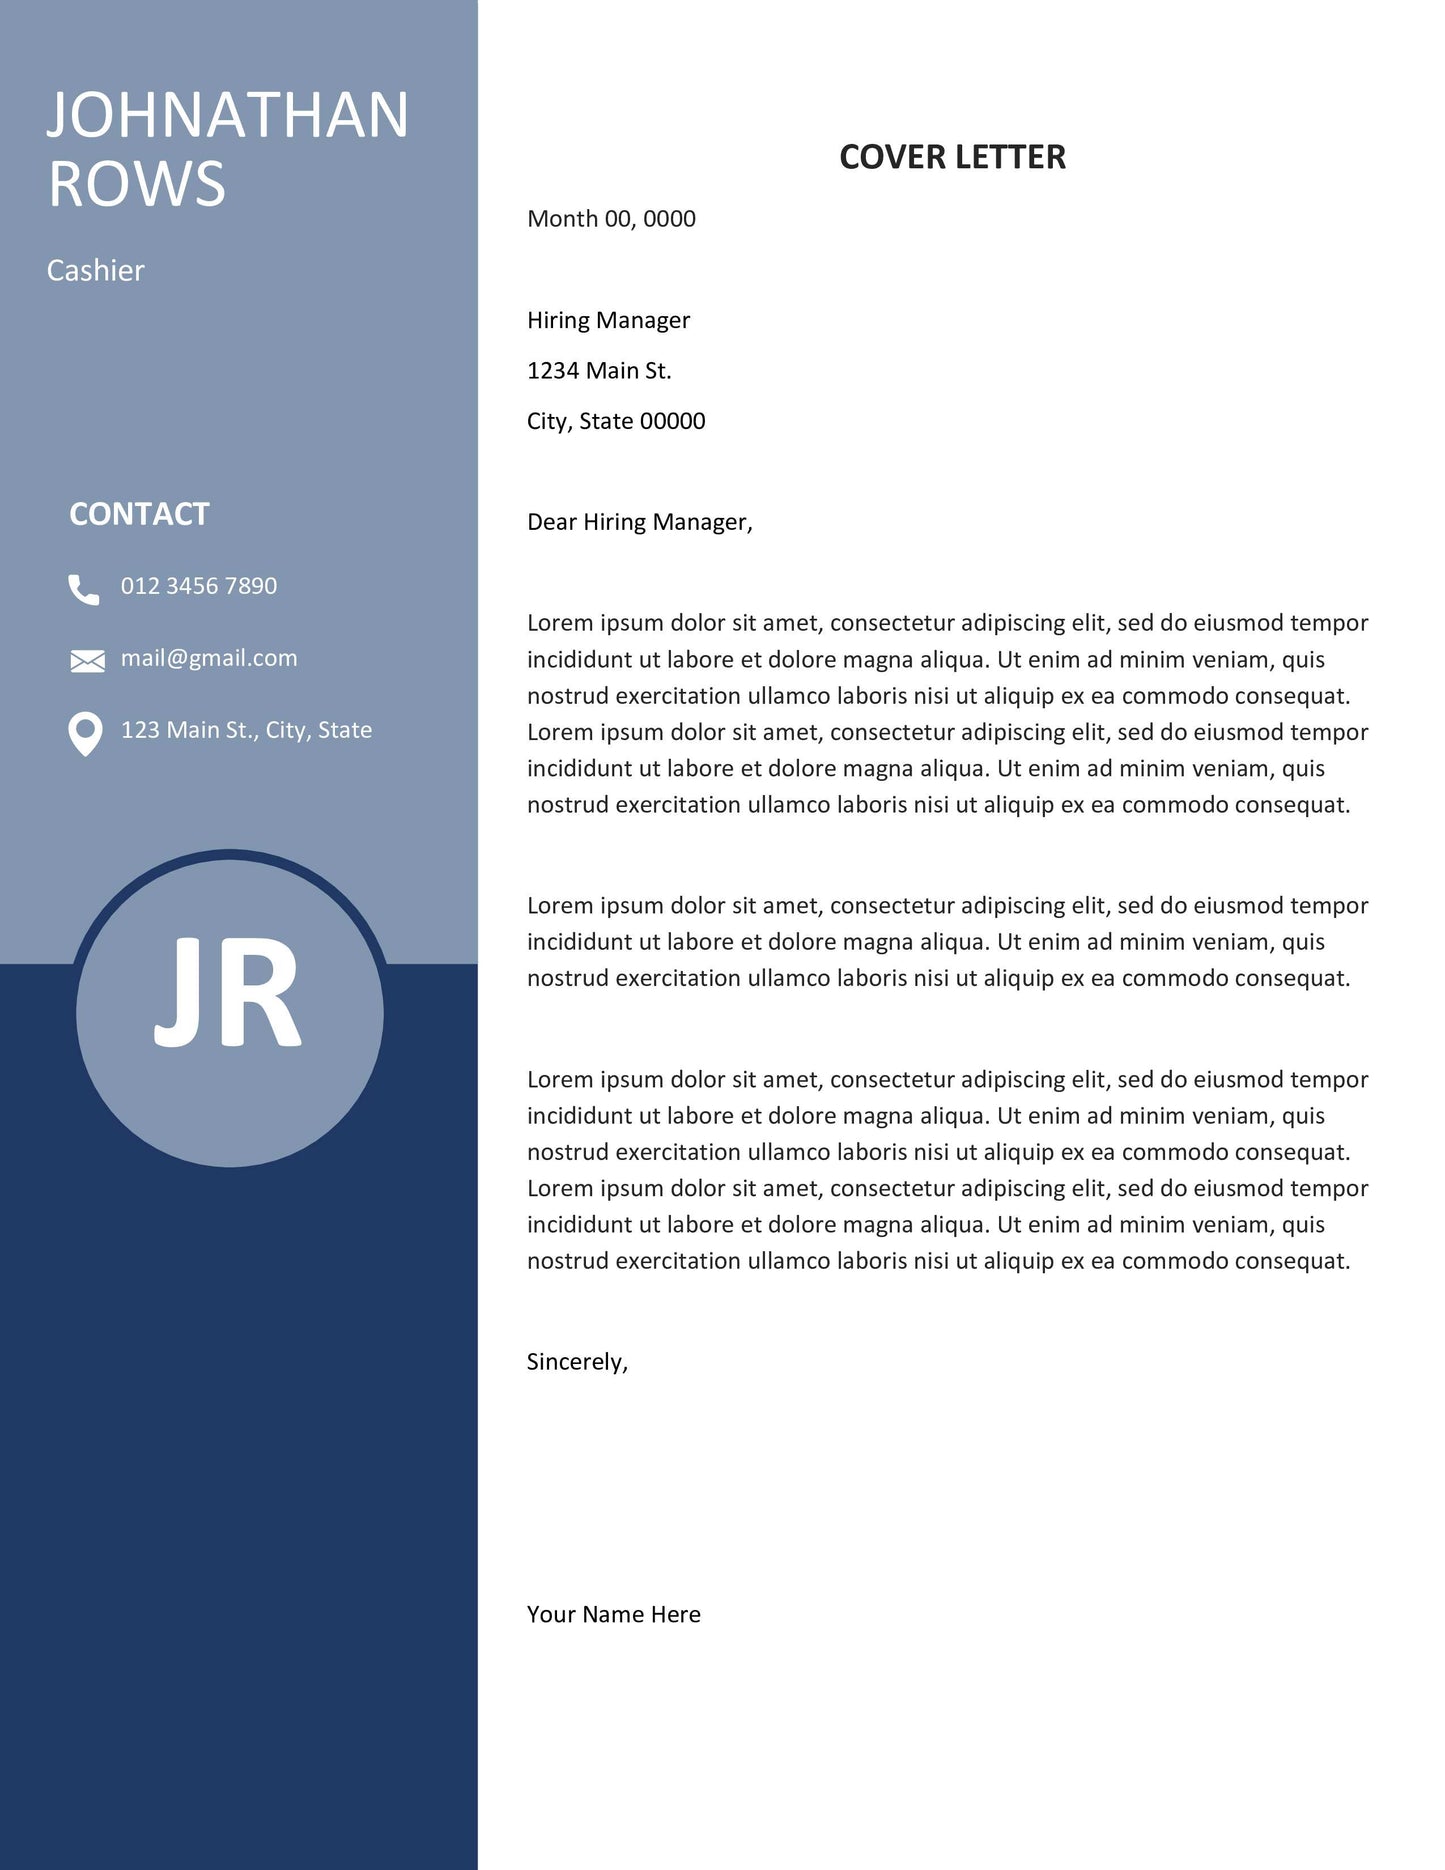 Resume + Cover Letter Template Microsoft Word | 02